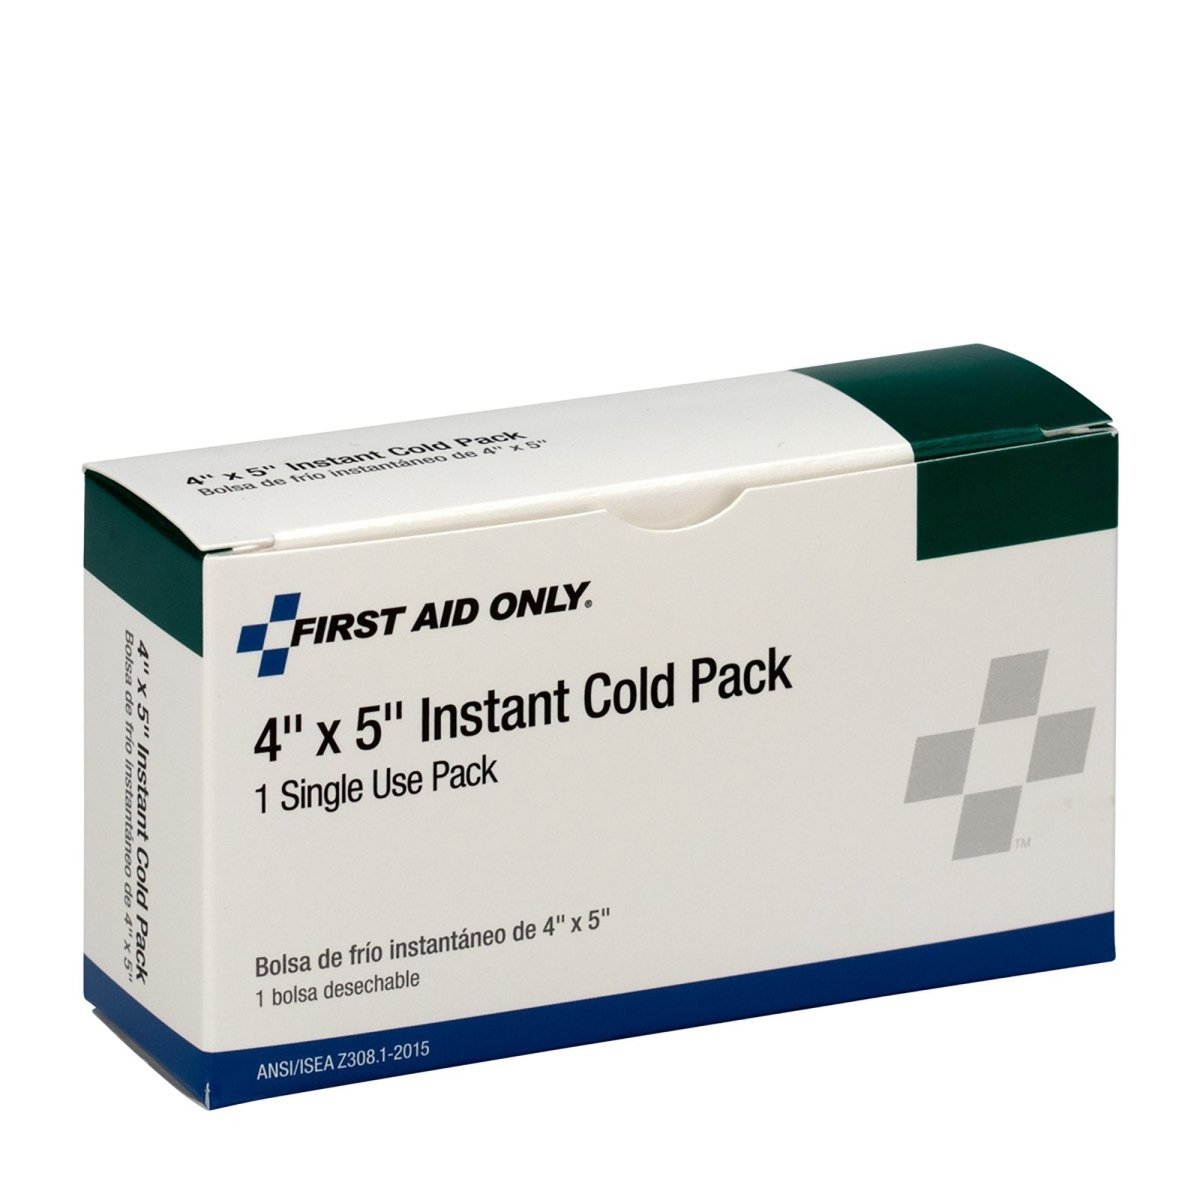 First Aid Only Instant Cold Pack, 4 x 5 Inch - 1127689_CS - 1